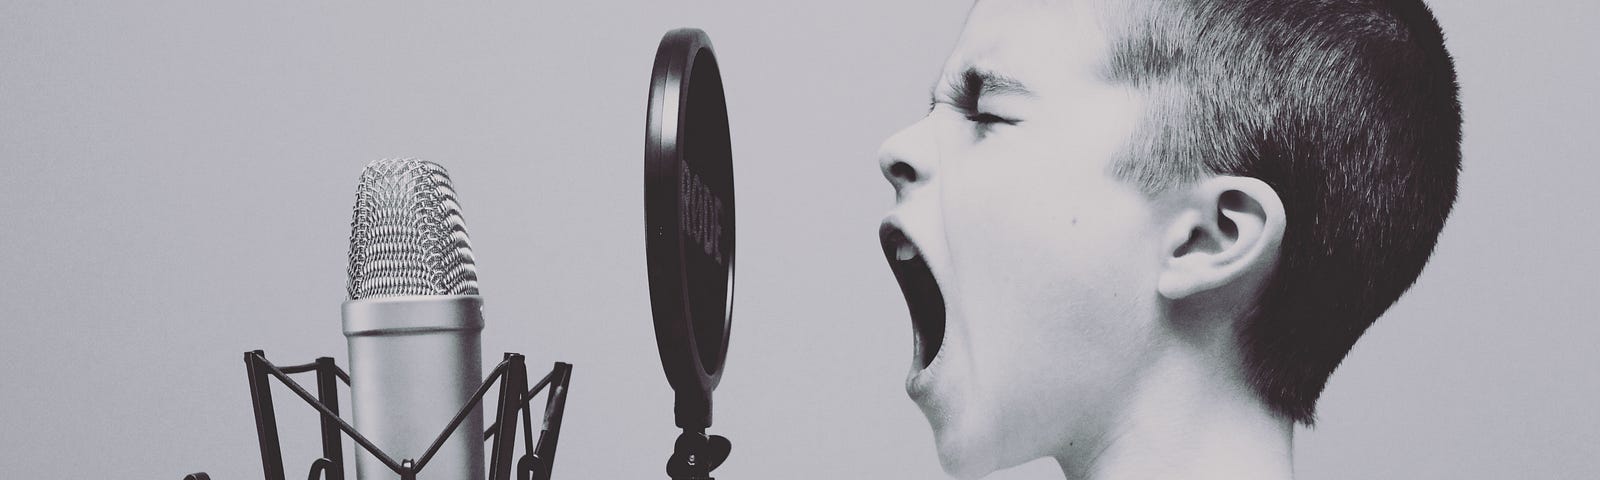 Boy screaming into a microphone